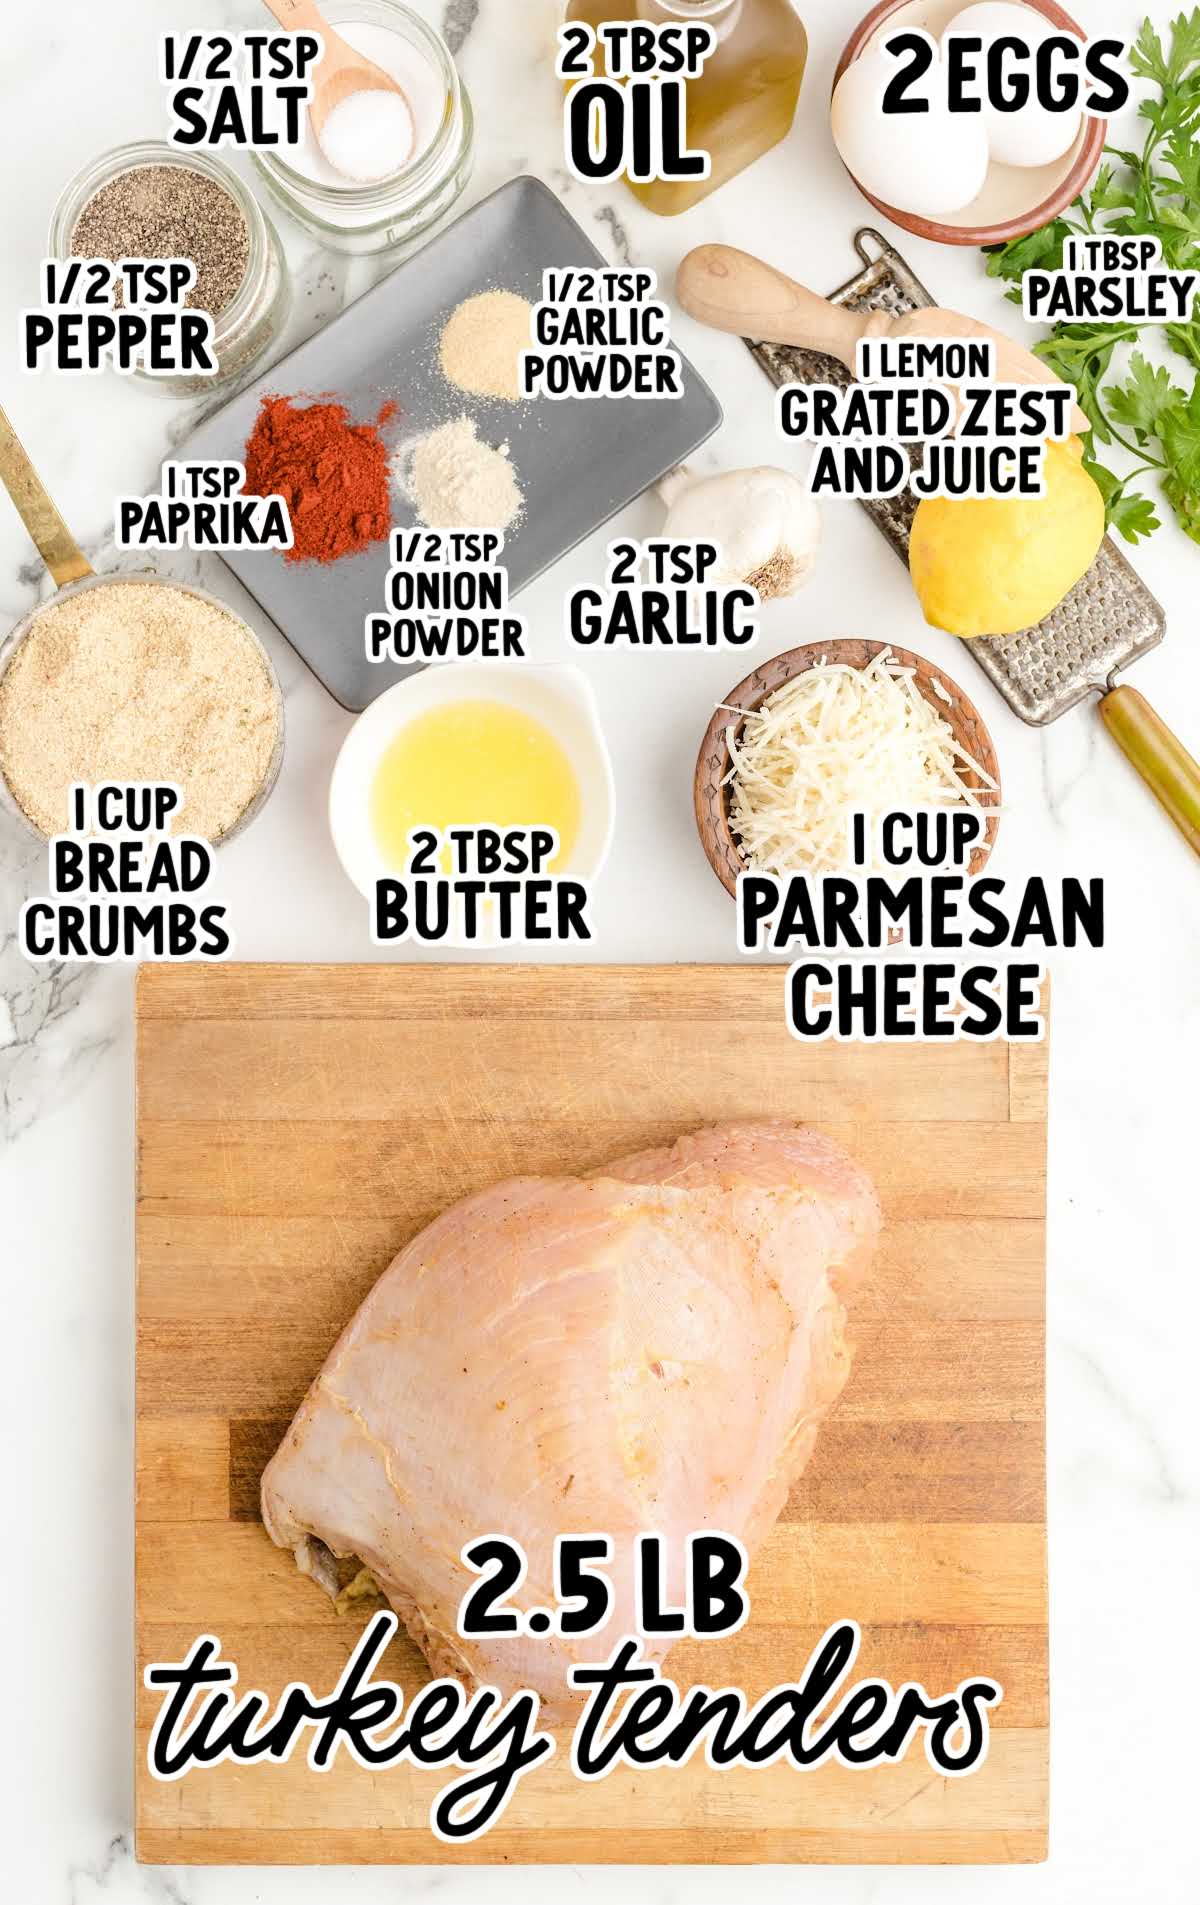 Turkey Tenders raw ingredients that are labeled